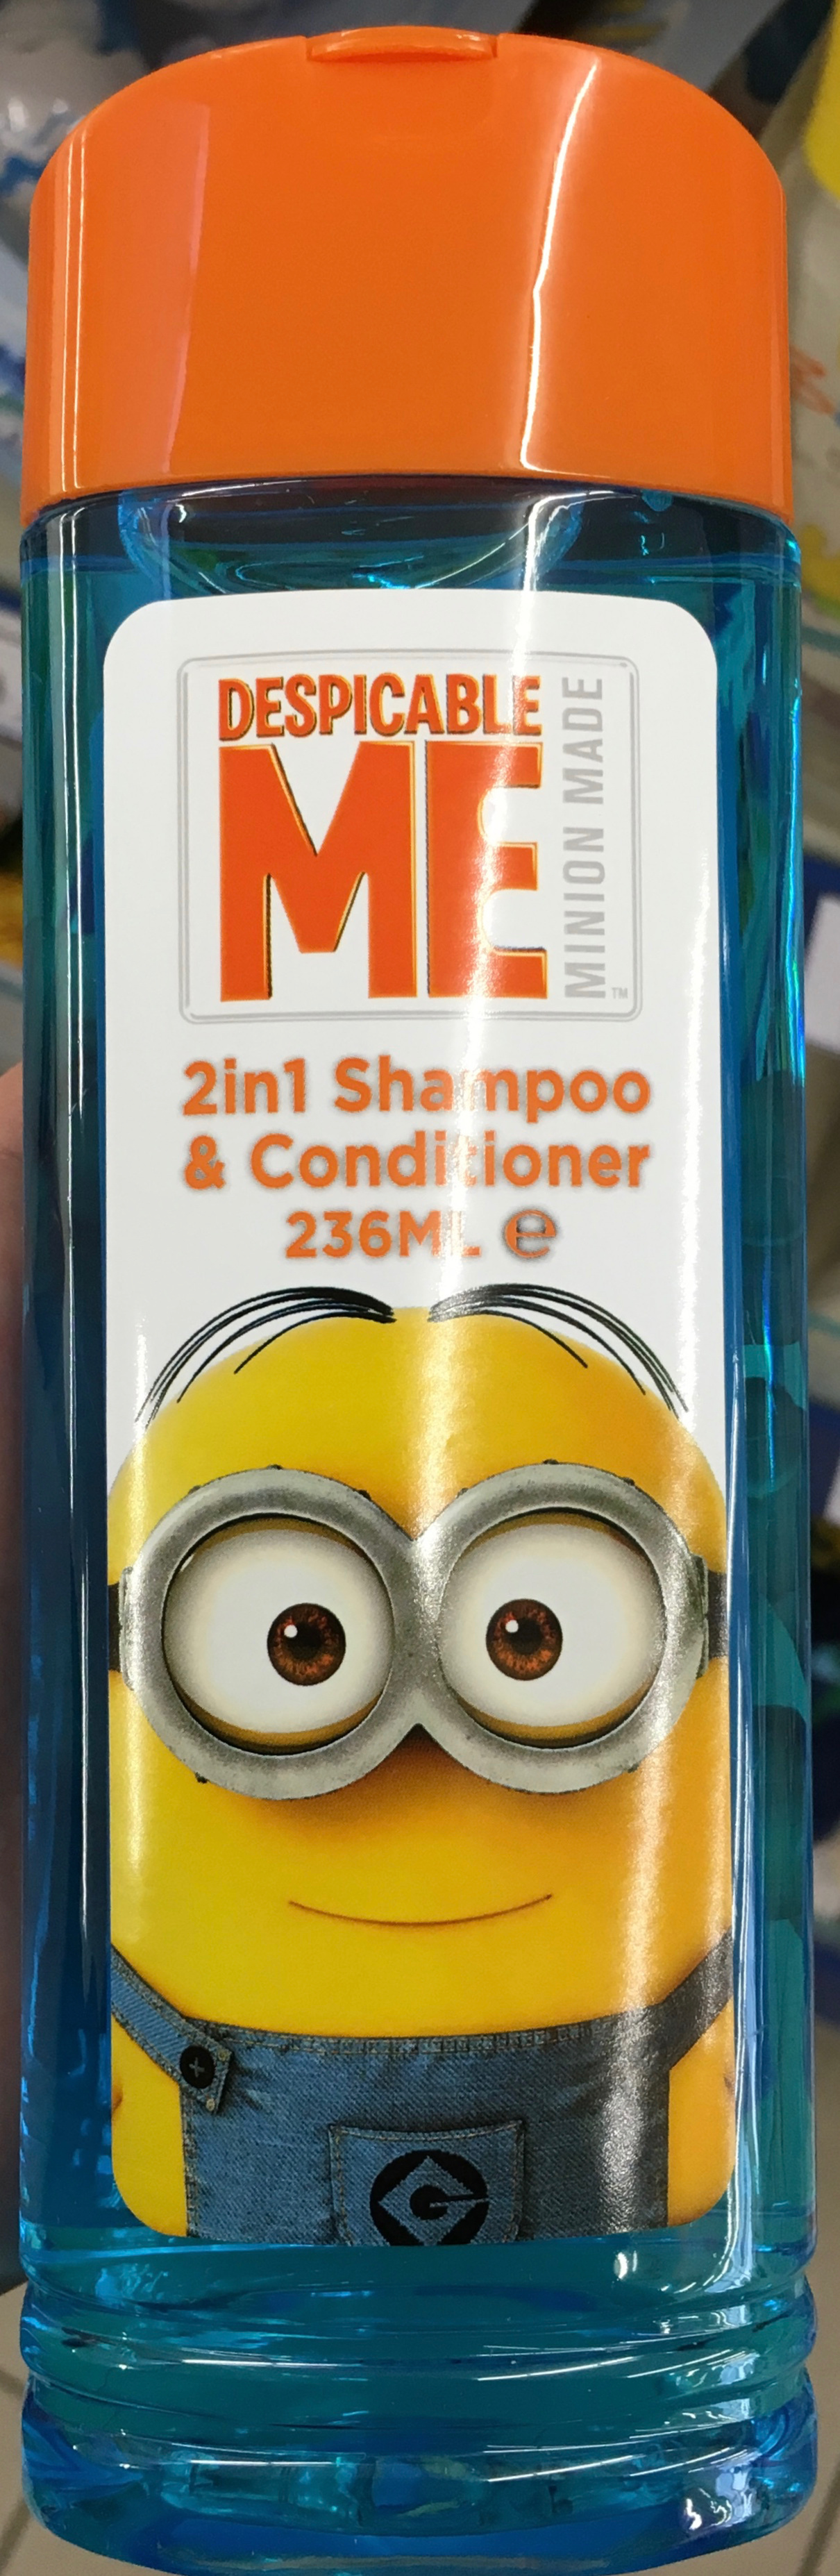 2in1 Shampoo & Conditioner Despicable Me - Product - fr